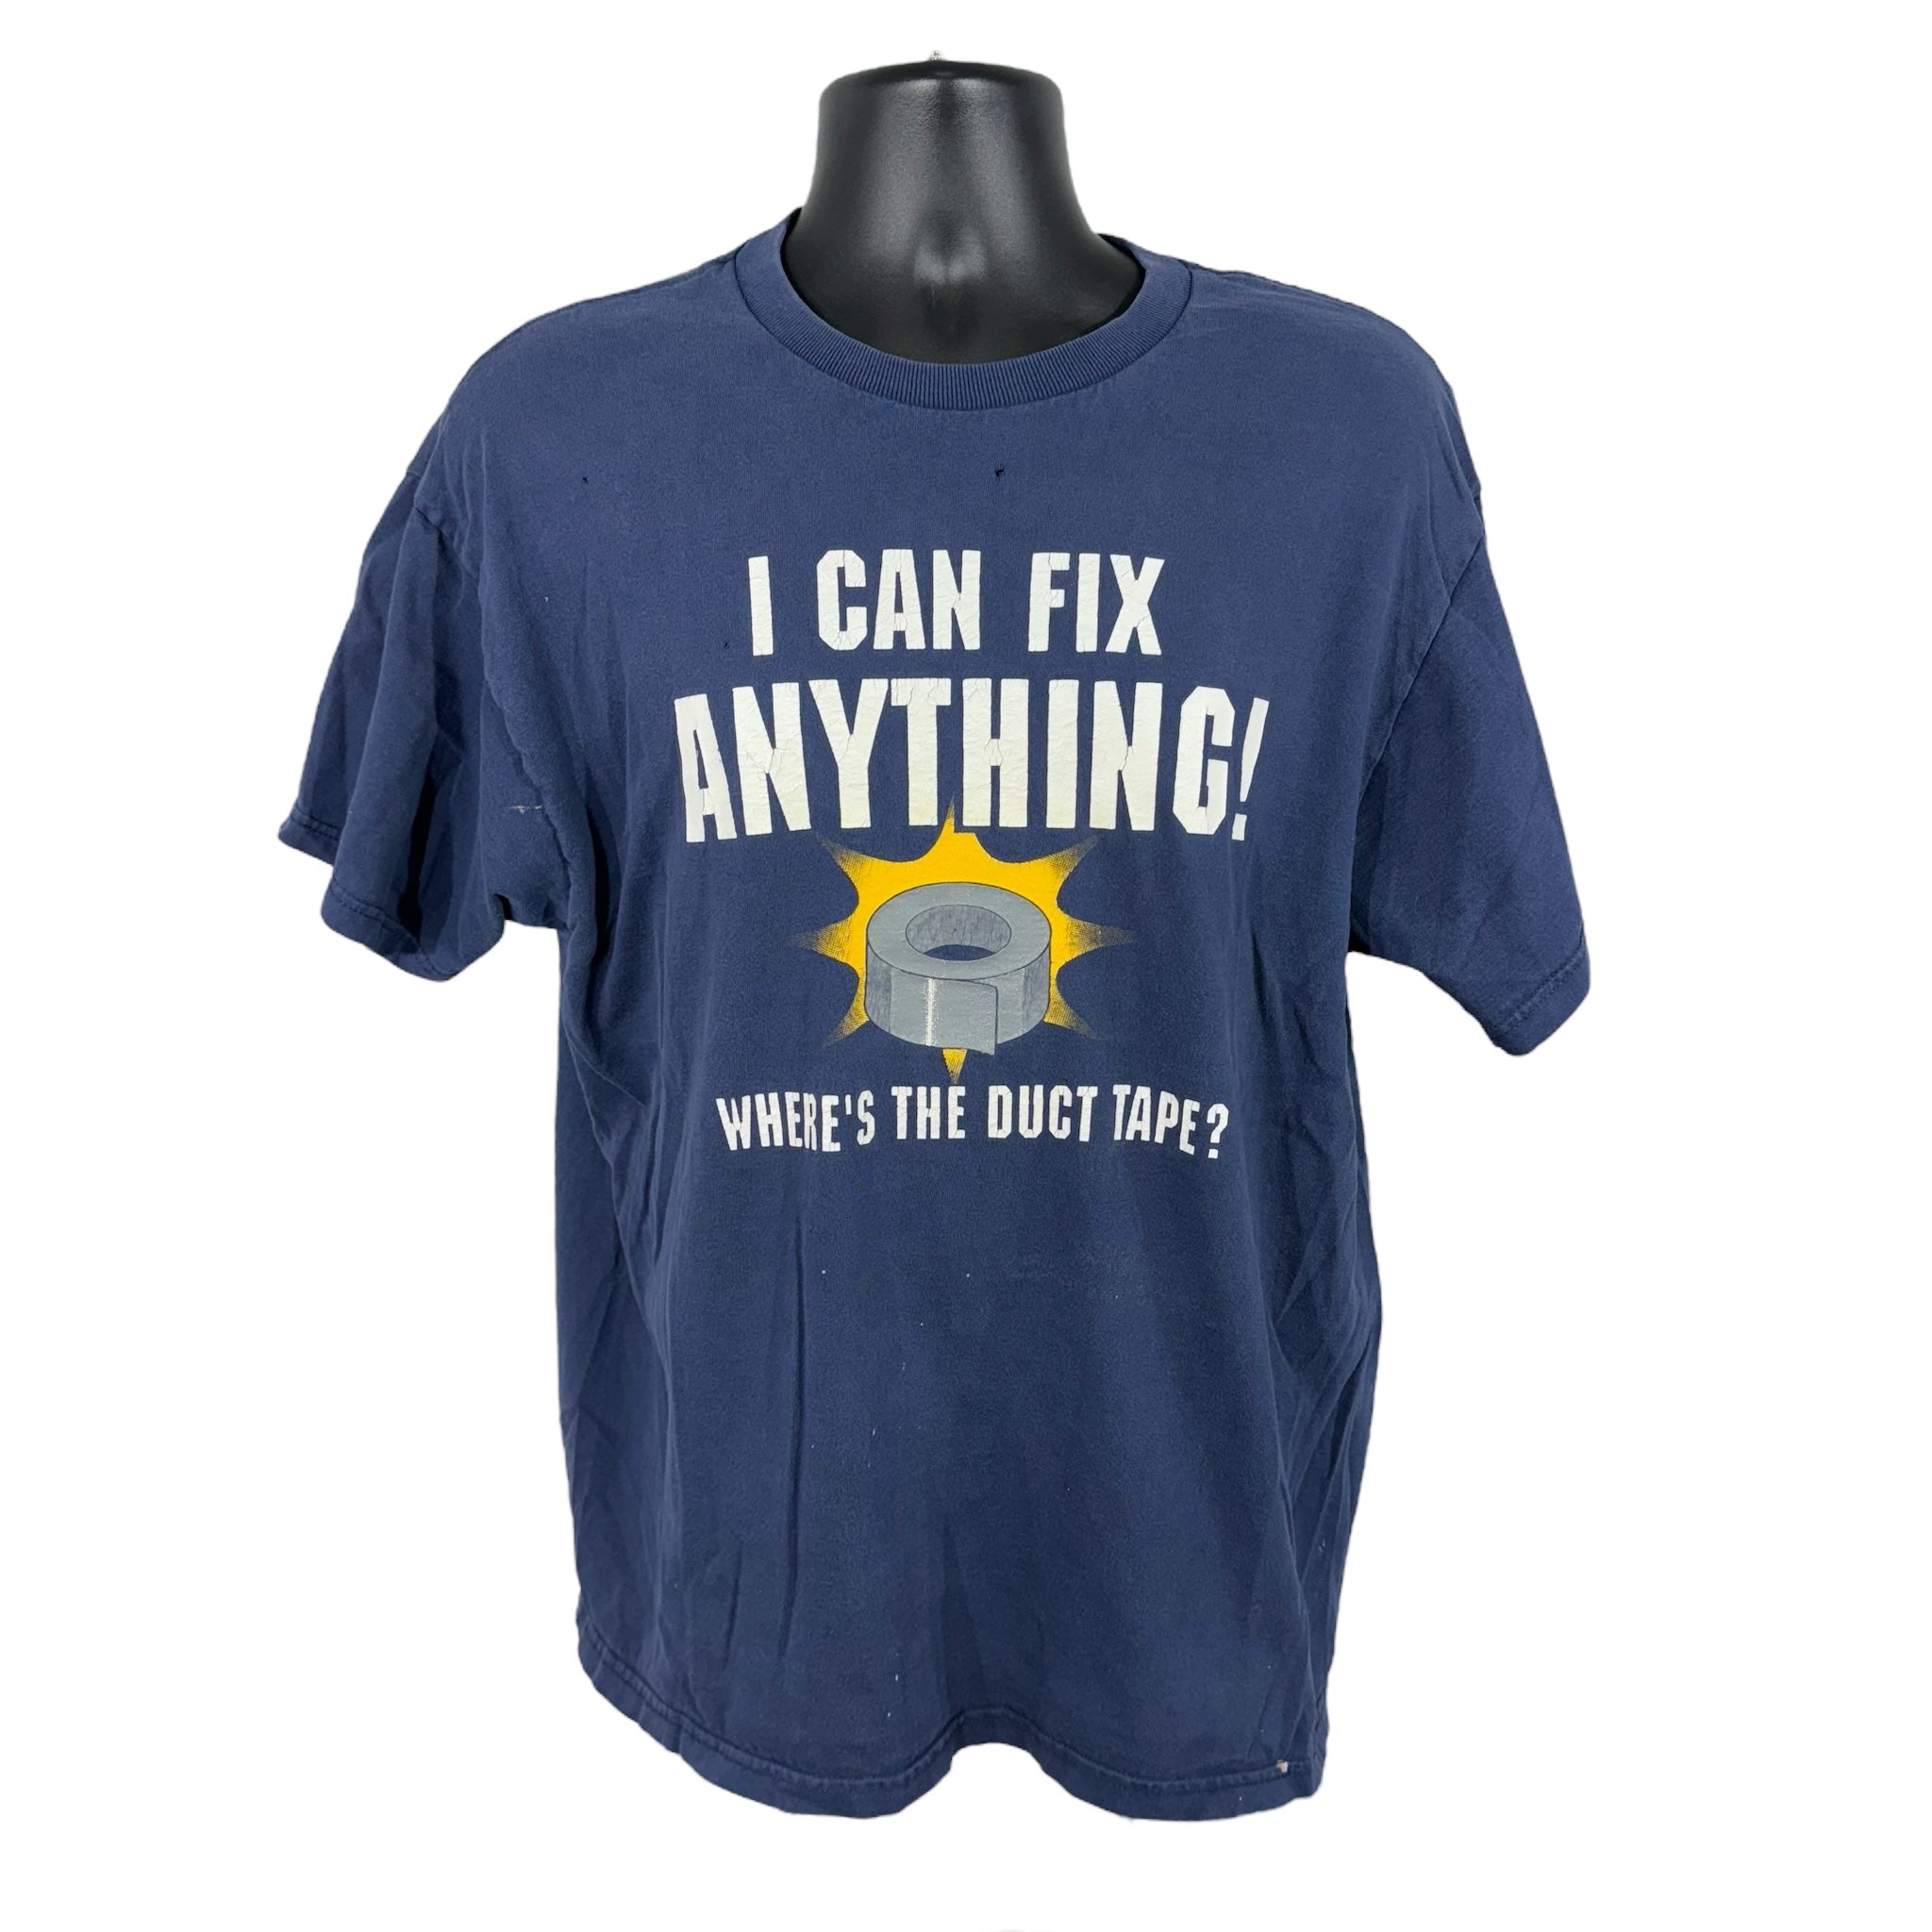 Vintage "I Can Fix Anything" Duct Tape Tee